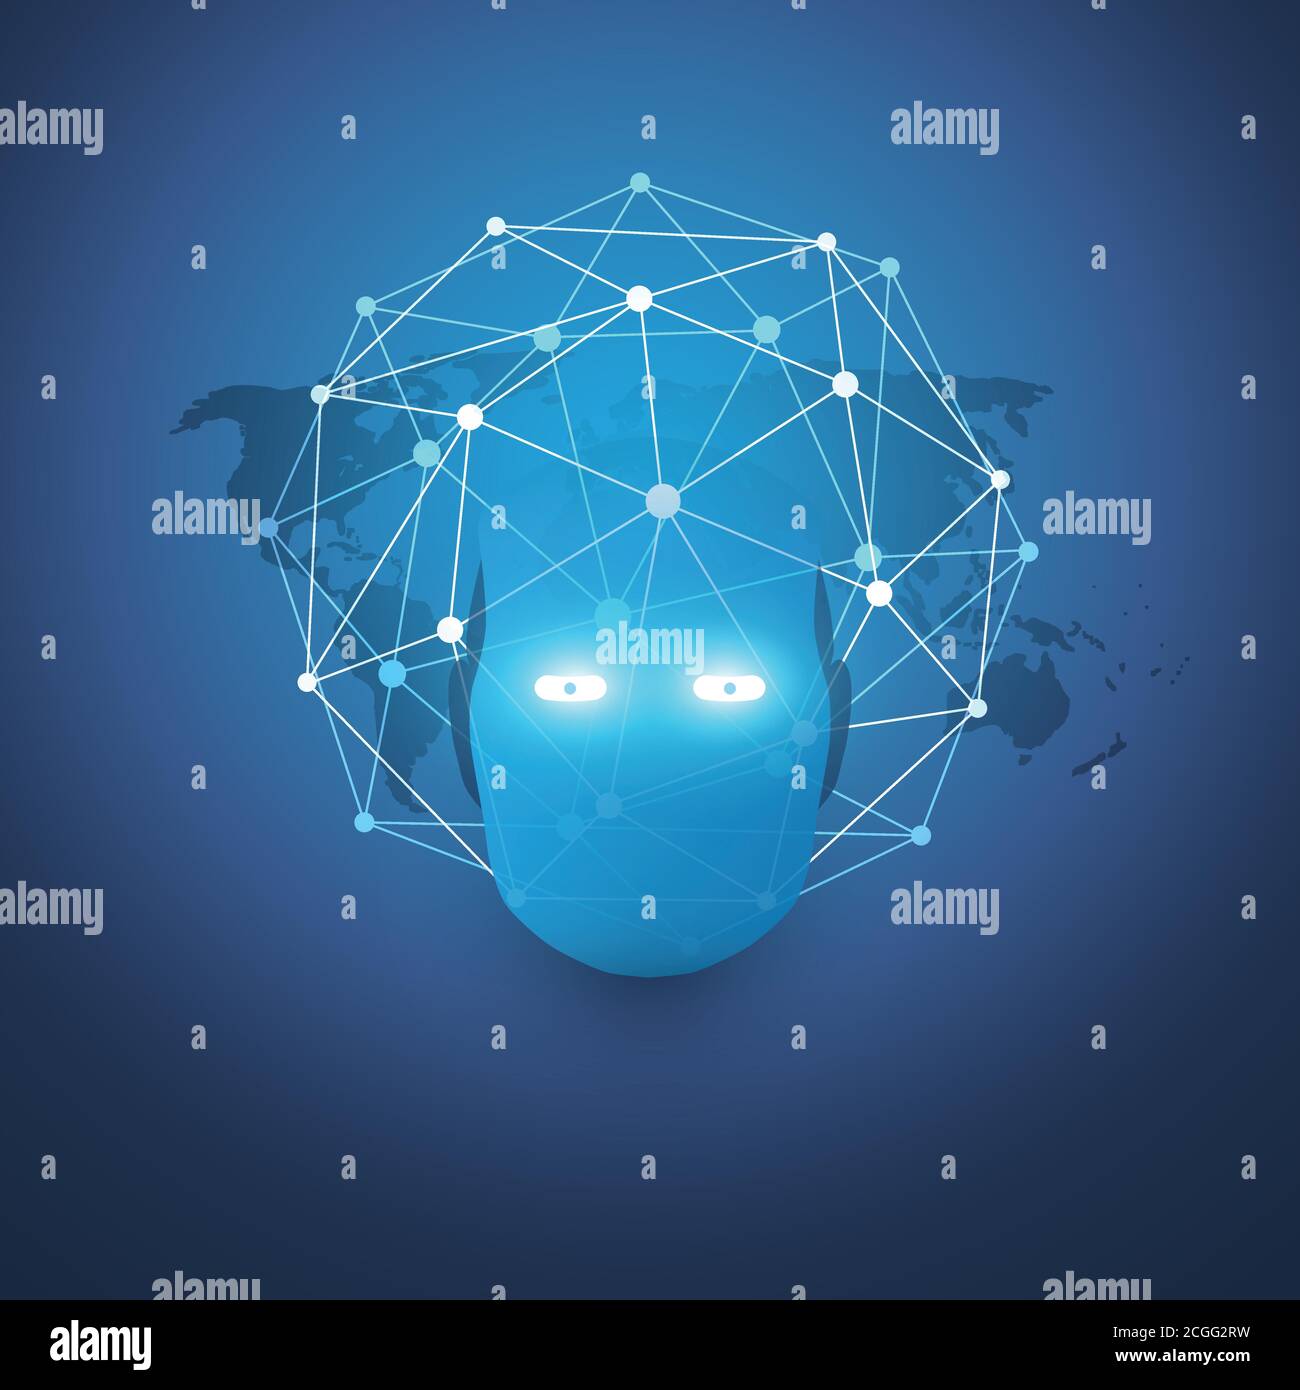 Abstract Modern Style Blue Machine Learning, Artificial Intelligence and Neural Networks Design Concept with World Map, Global 3D Network Mesh and Rob Stock Vector